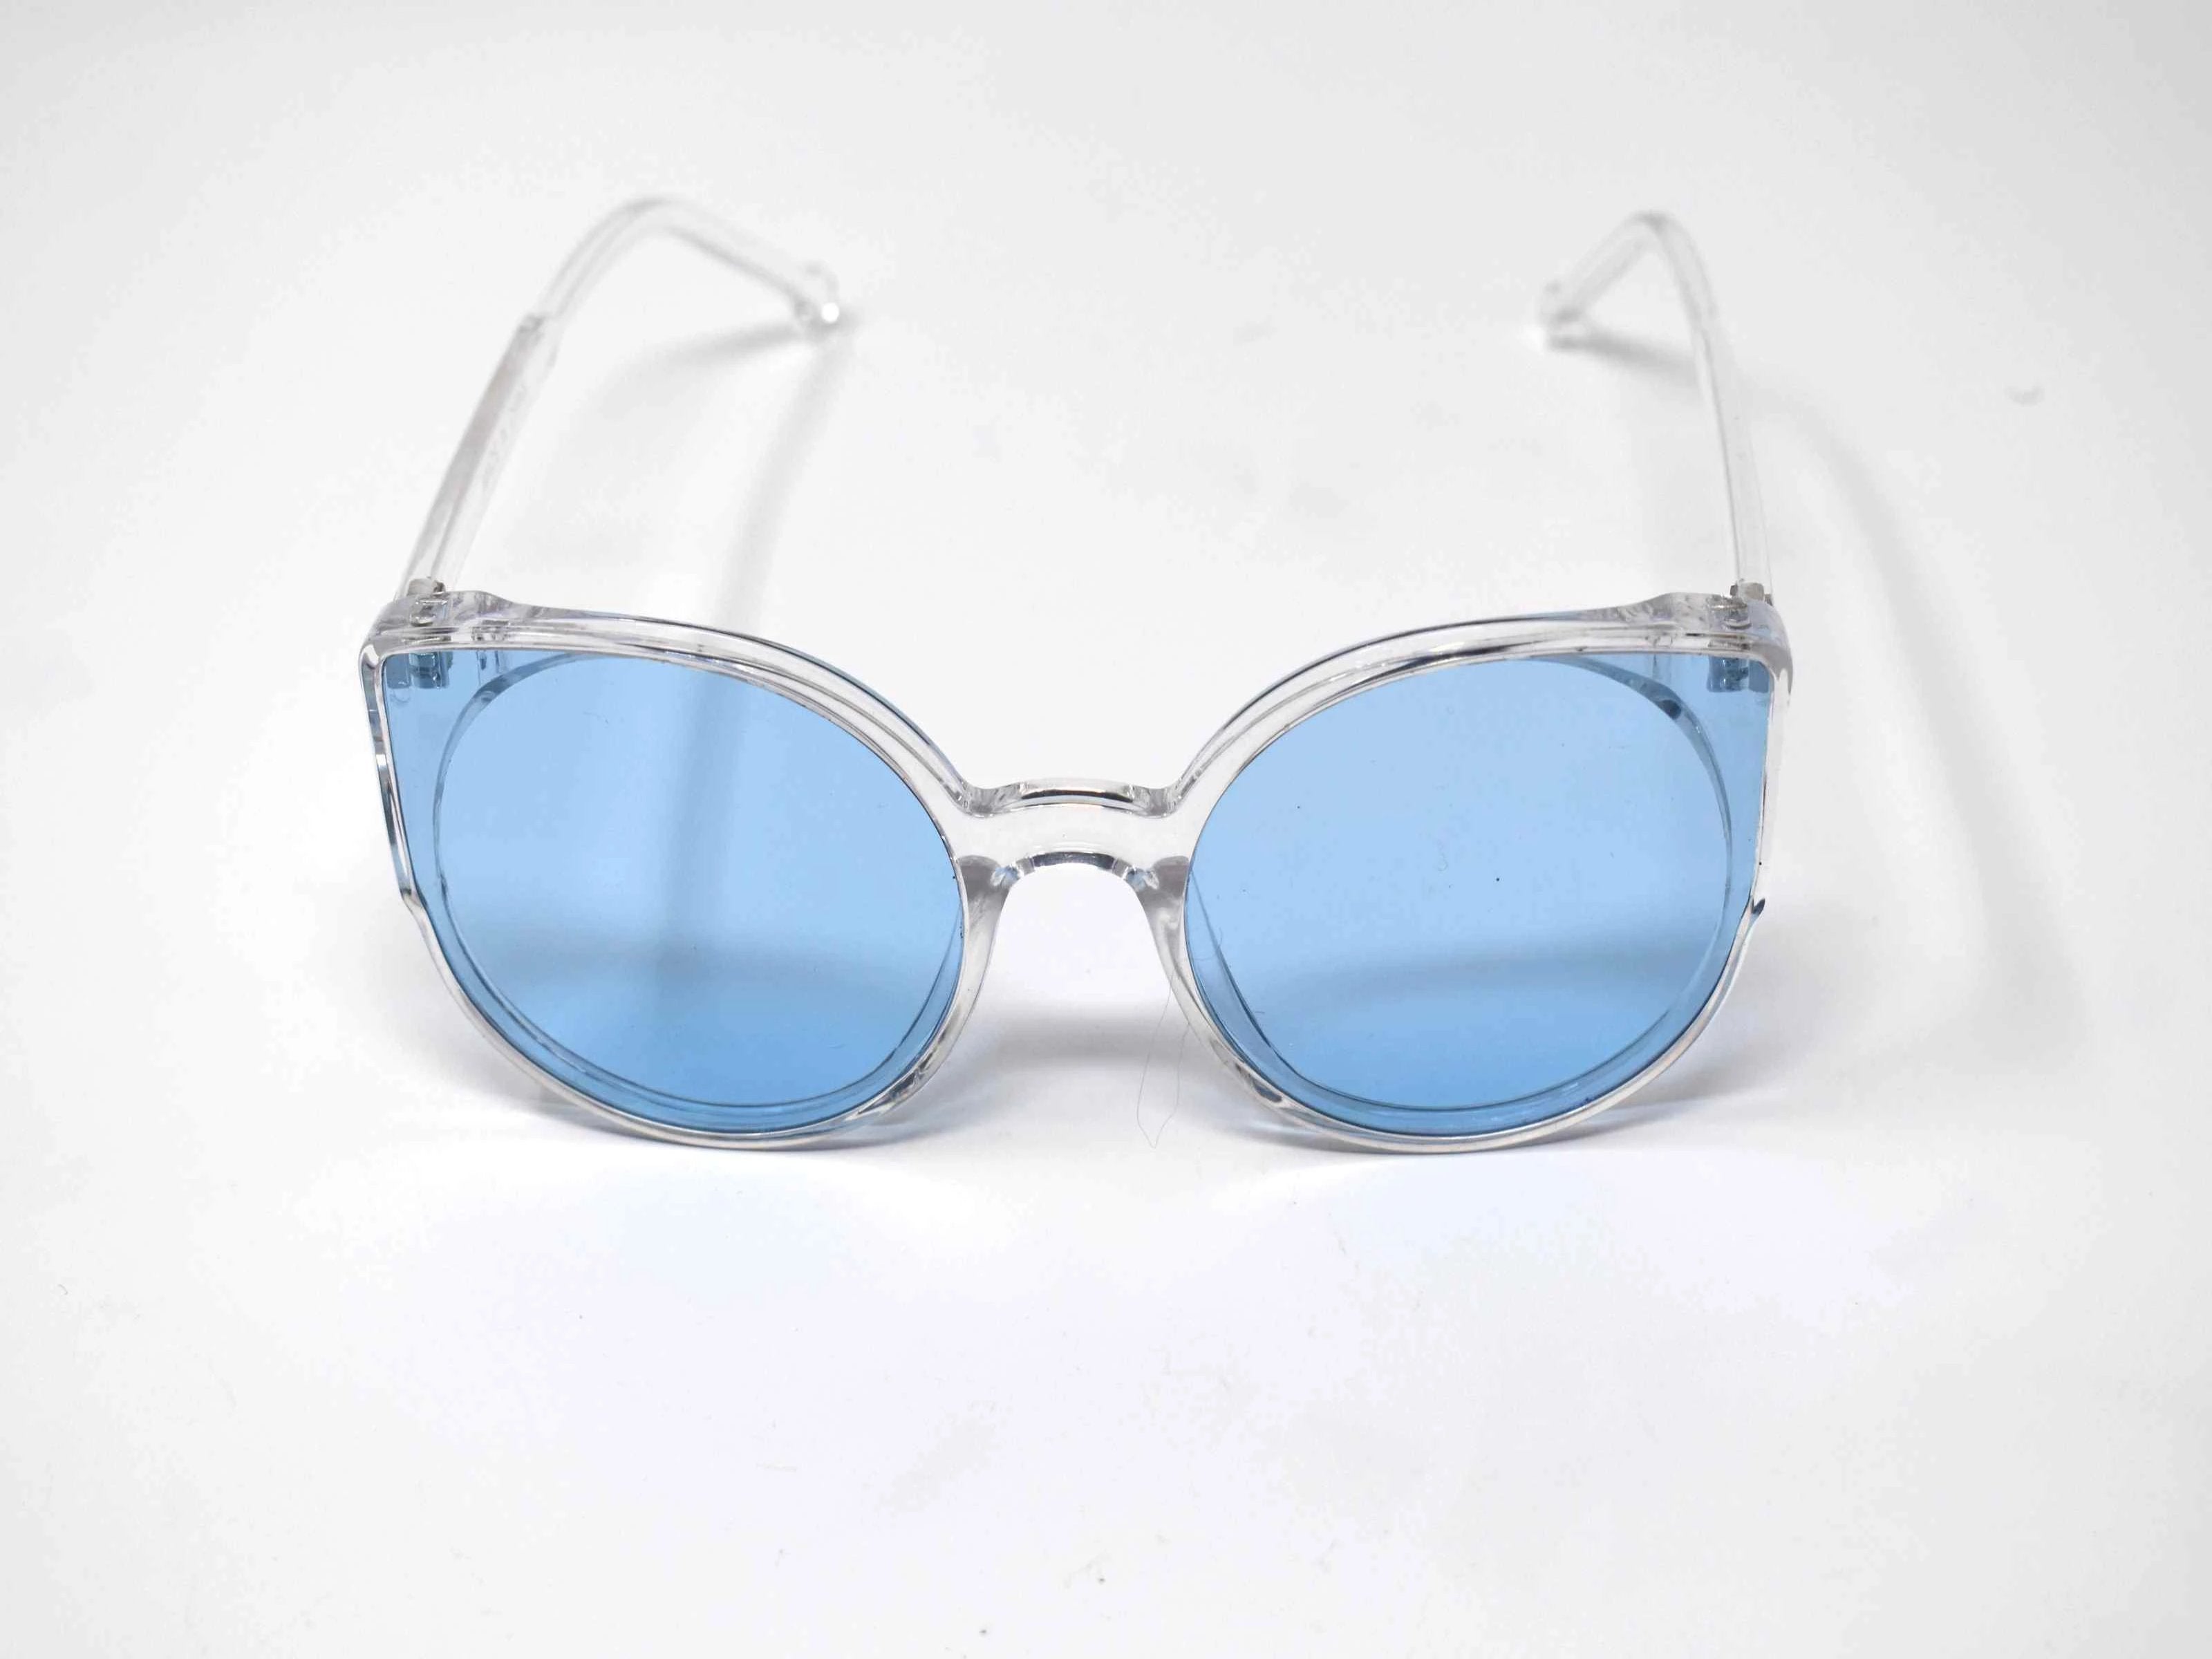 Say hello to our stylish Tansy clear framed sunglasses with blue lens and a cat eye shape.